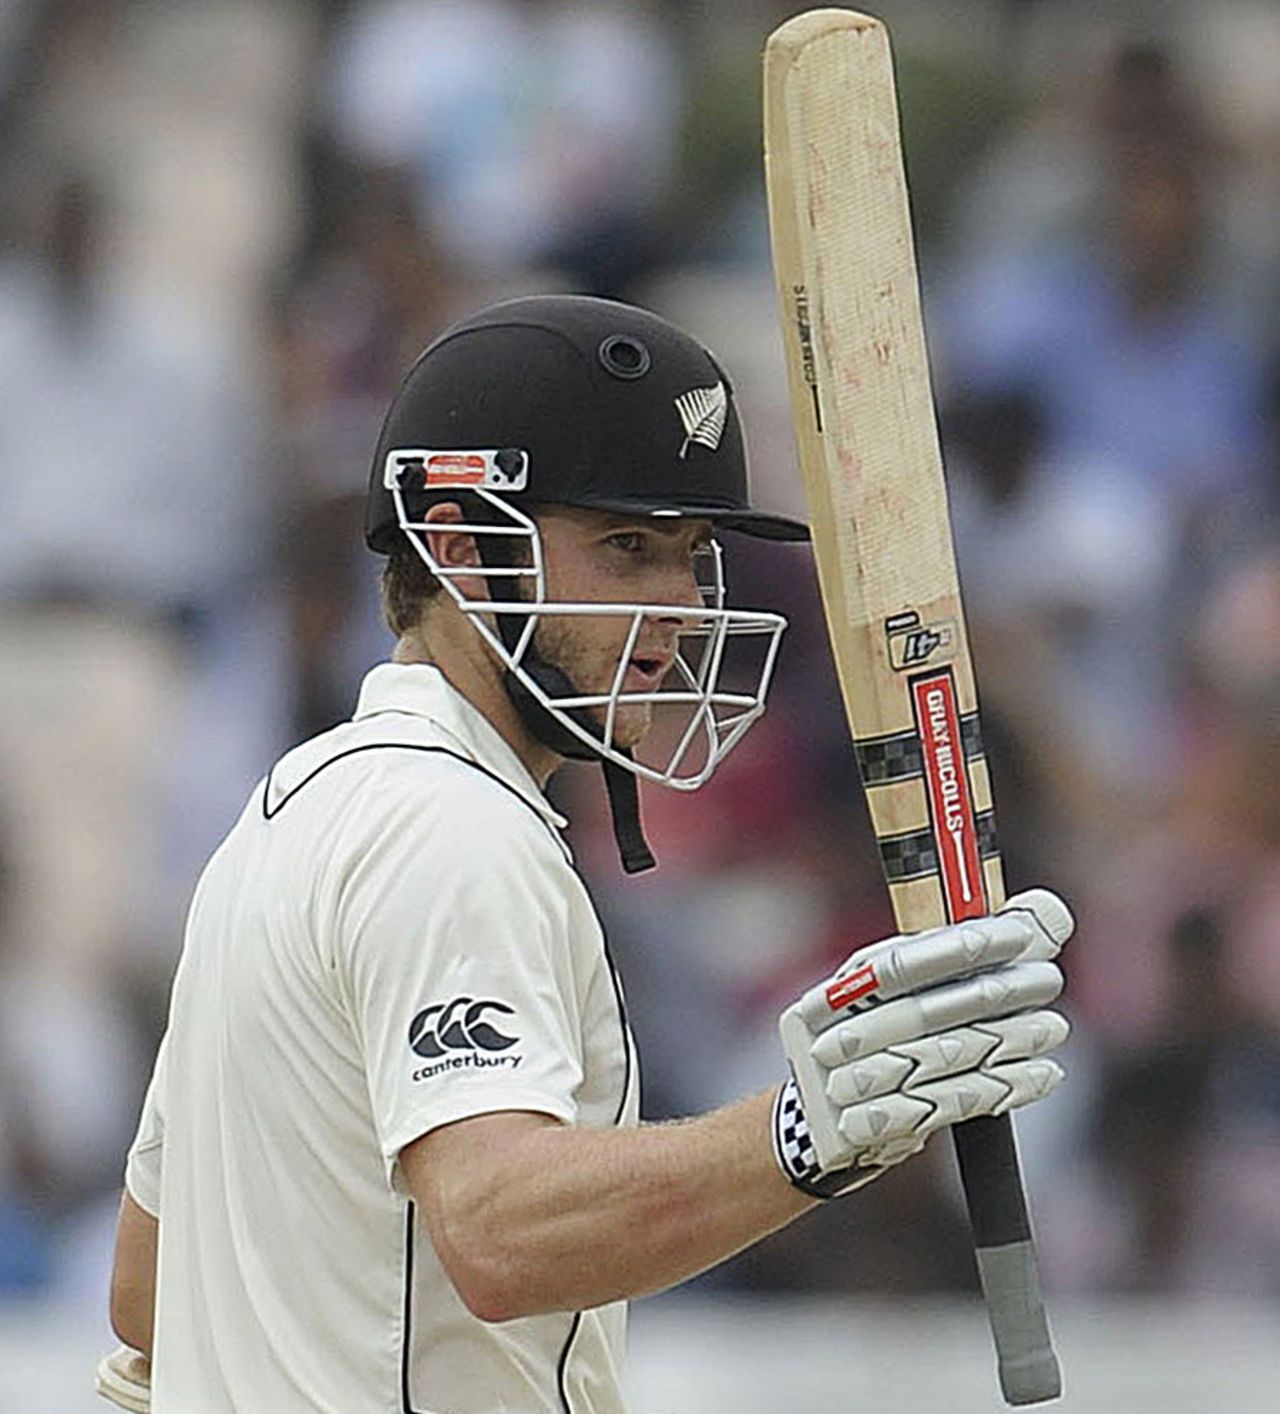 Kane Williamson acknowledges his fifty, India v New Zealand, 1st Test, Hyderabad, 4th day, August 26, 2012